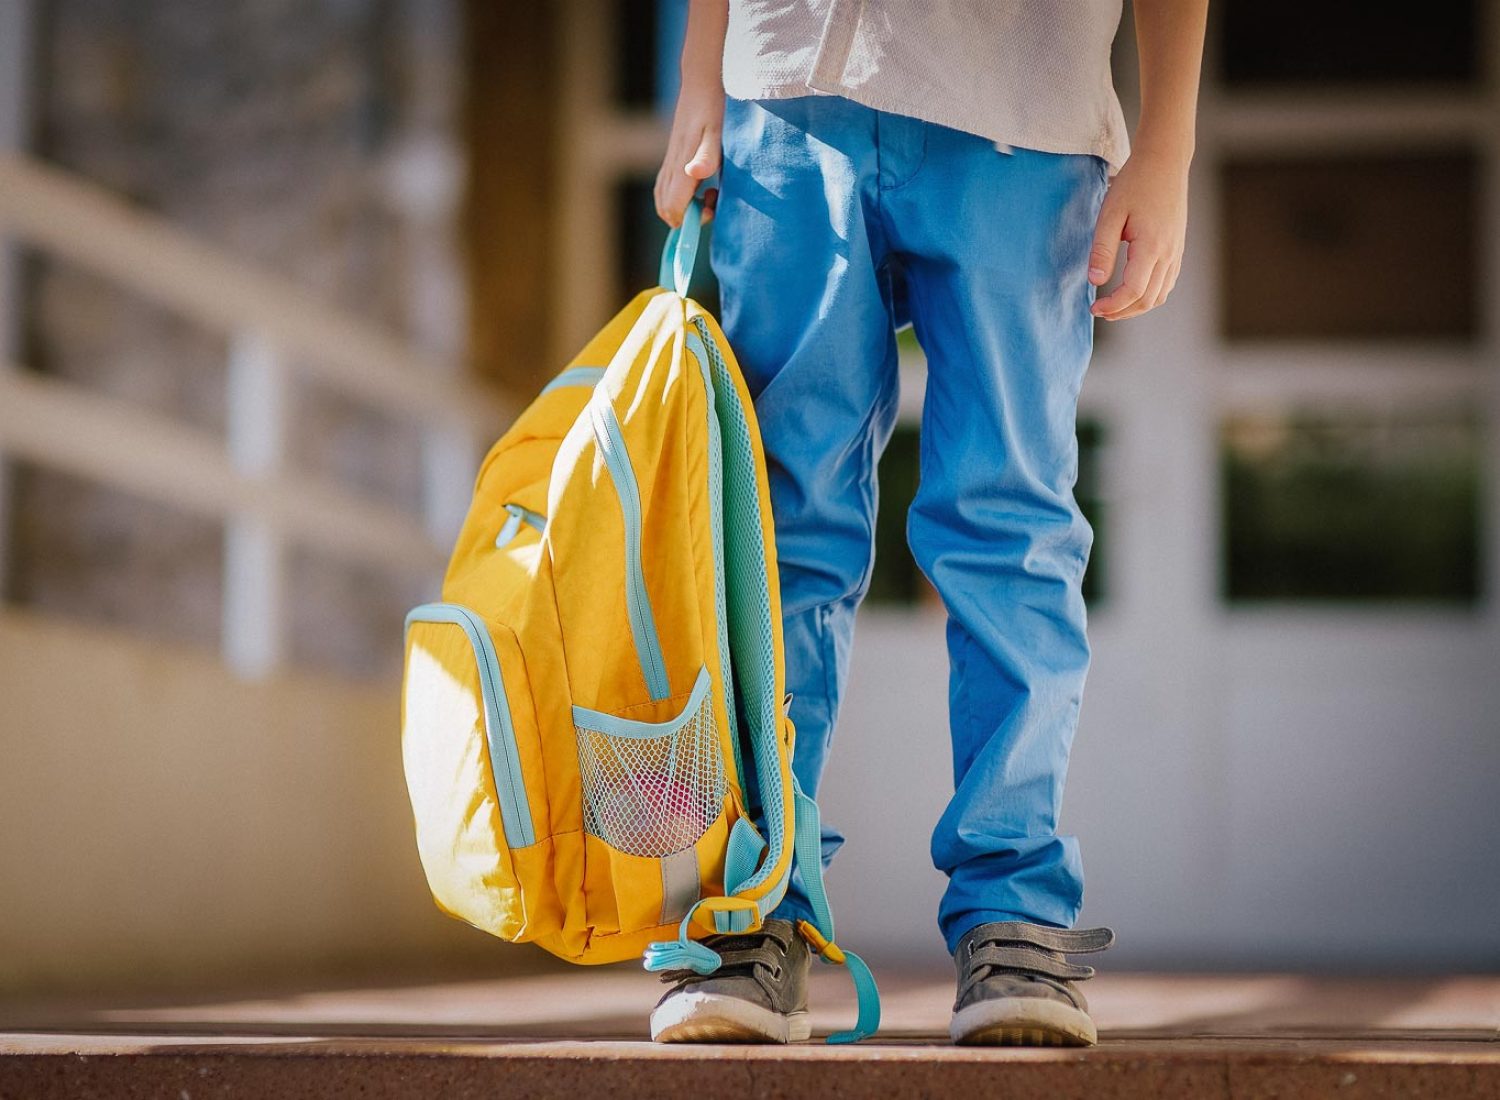 Little student with a backpack on the steps of the stairs of school building. Close-up of child legs, hands and schoolbag of boy standing on staircase of schoolhouse. Kids back to school concept.